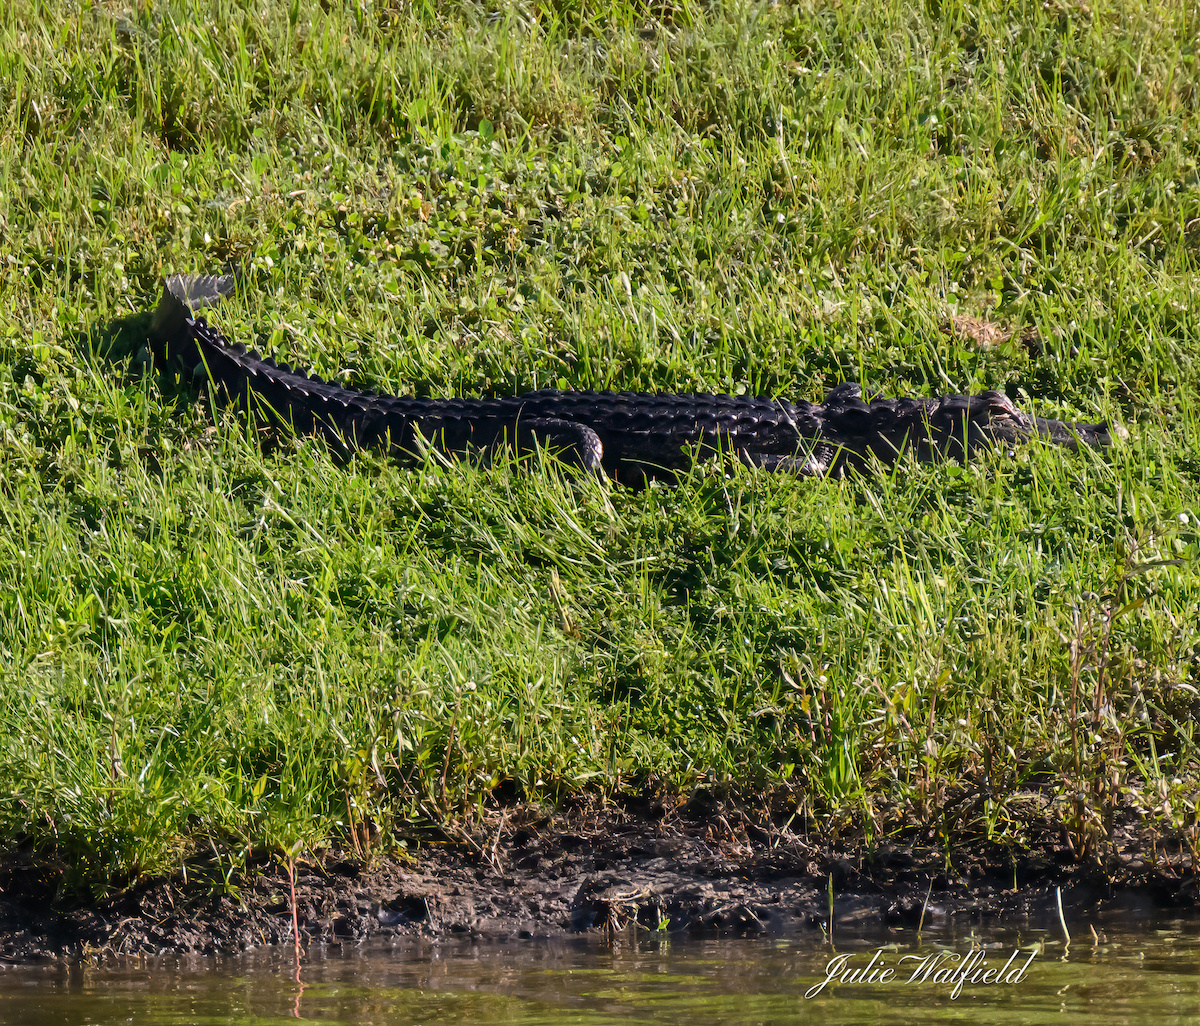 Alligator lurking in the grass in The Villages